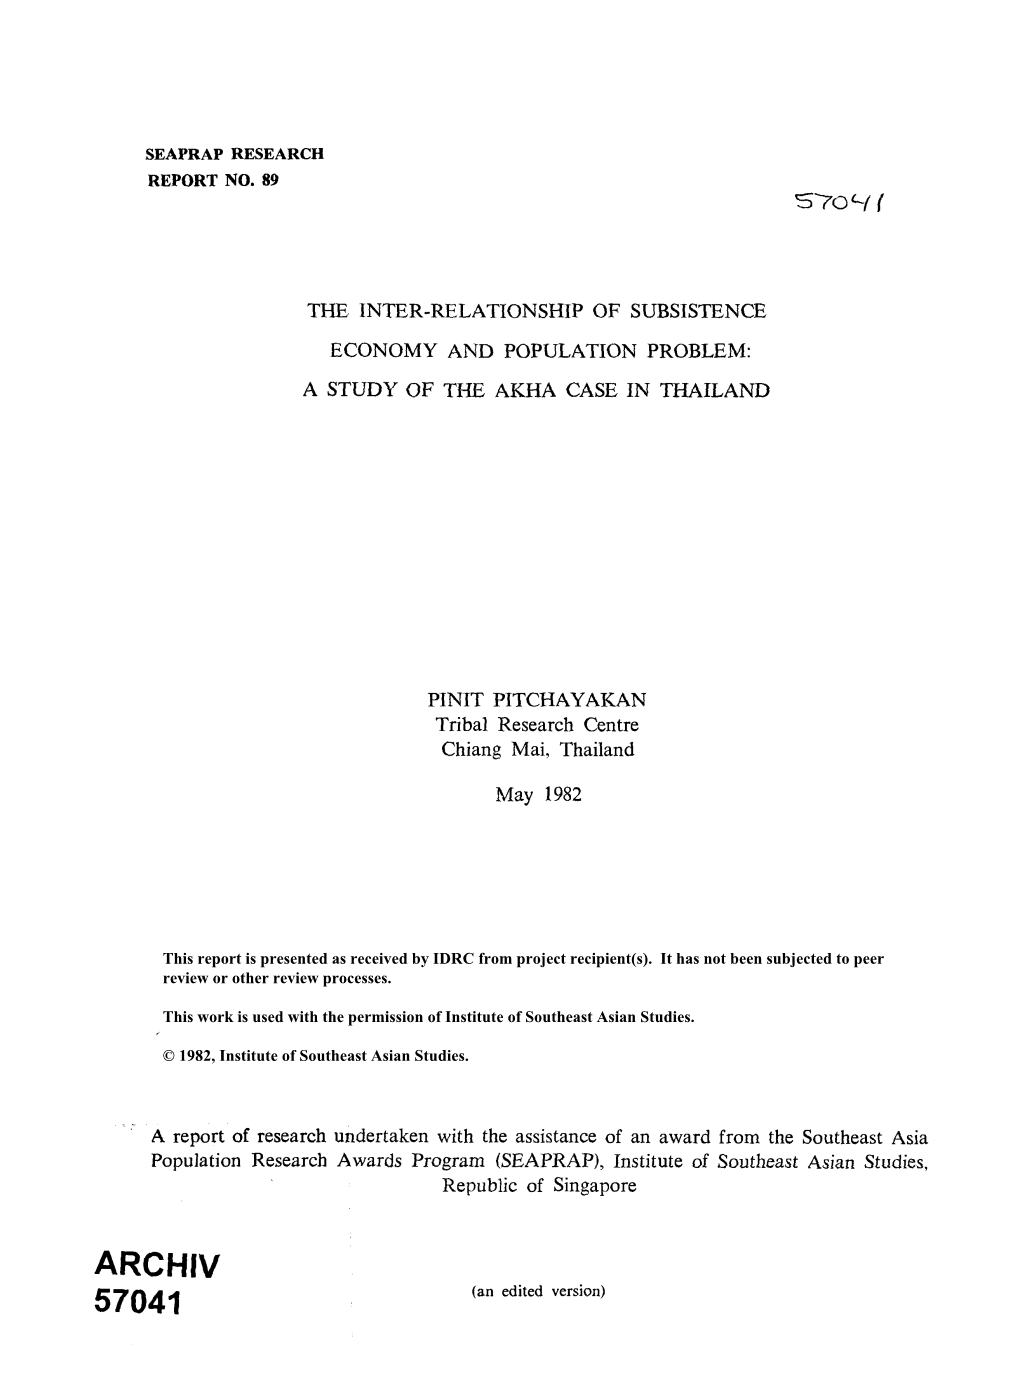 A Study of the Akha Case in Thailand